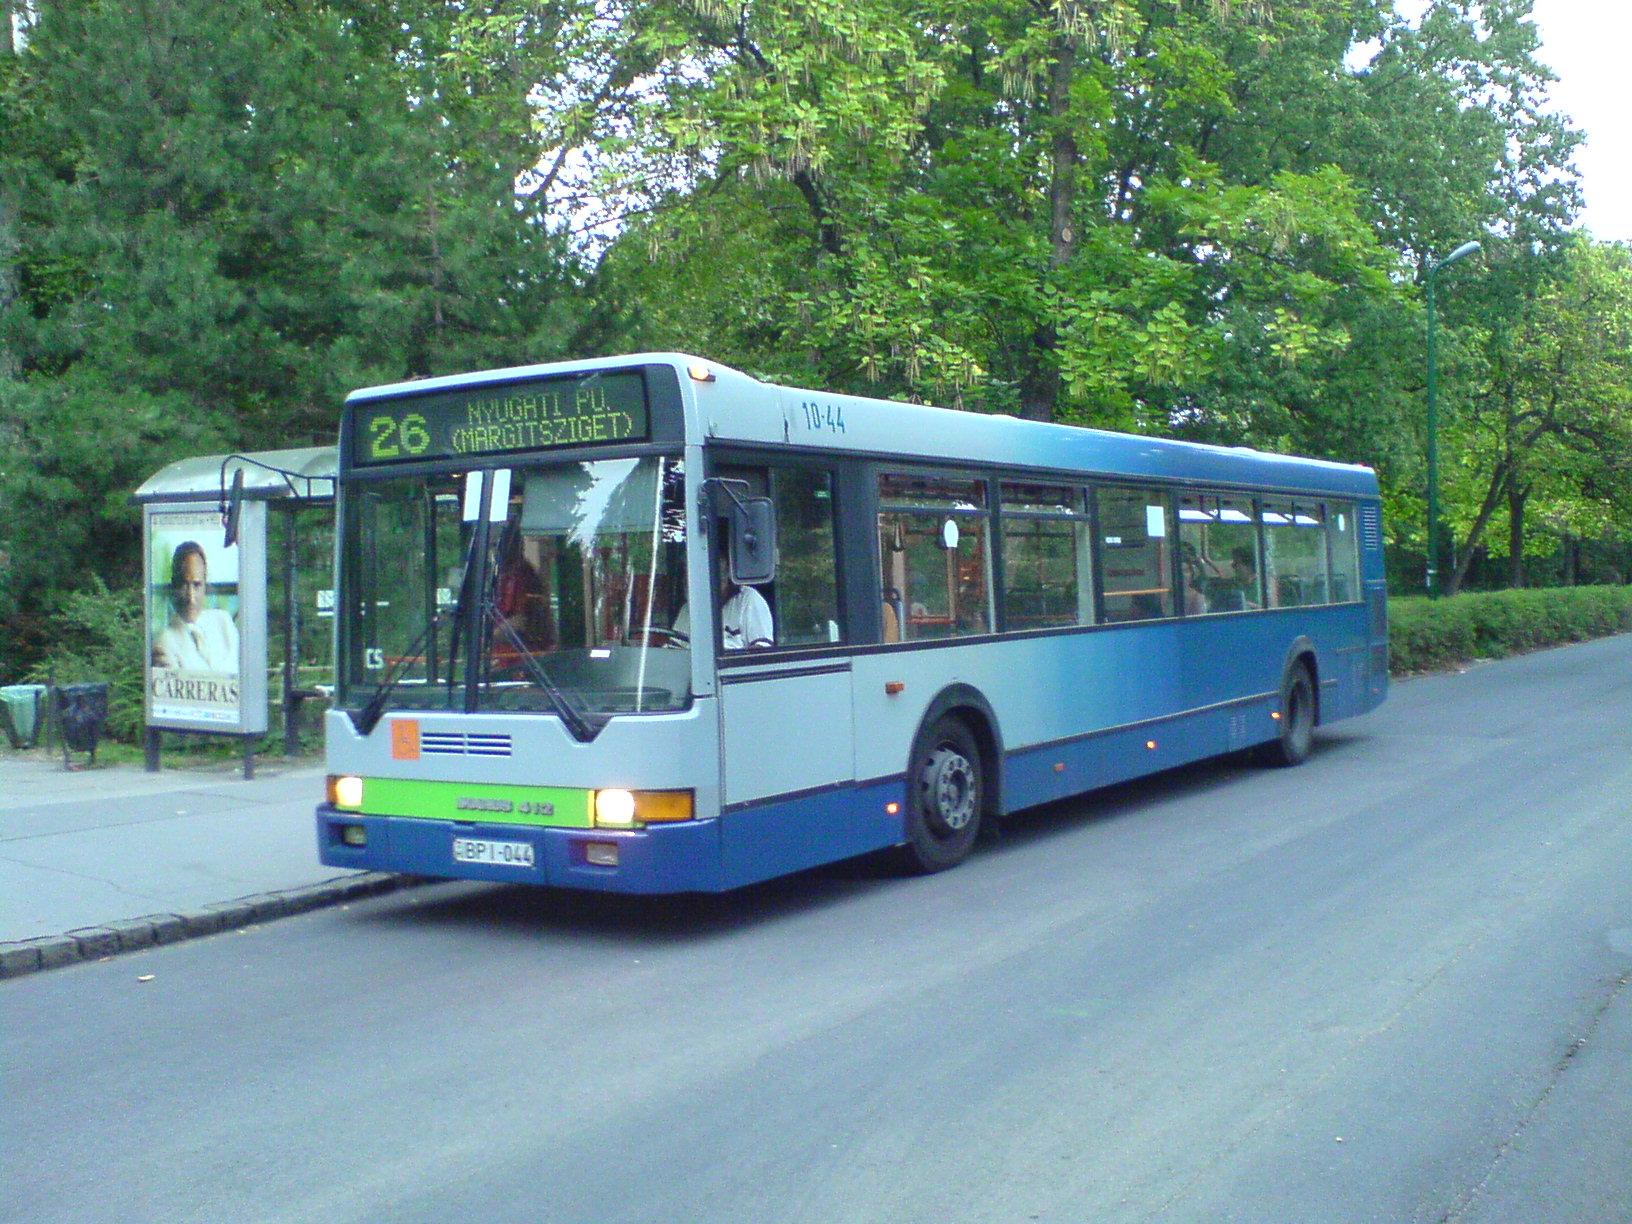 Budapest Transport Company To Lay Off Over 900 Bus Drivers